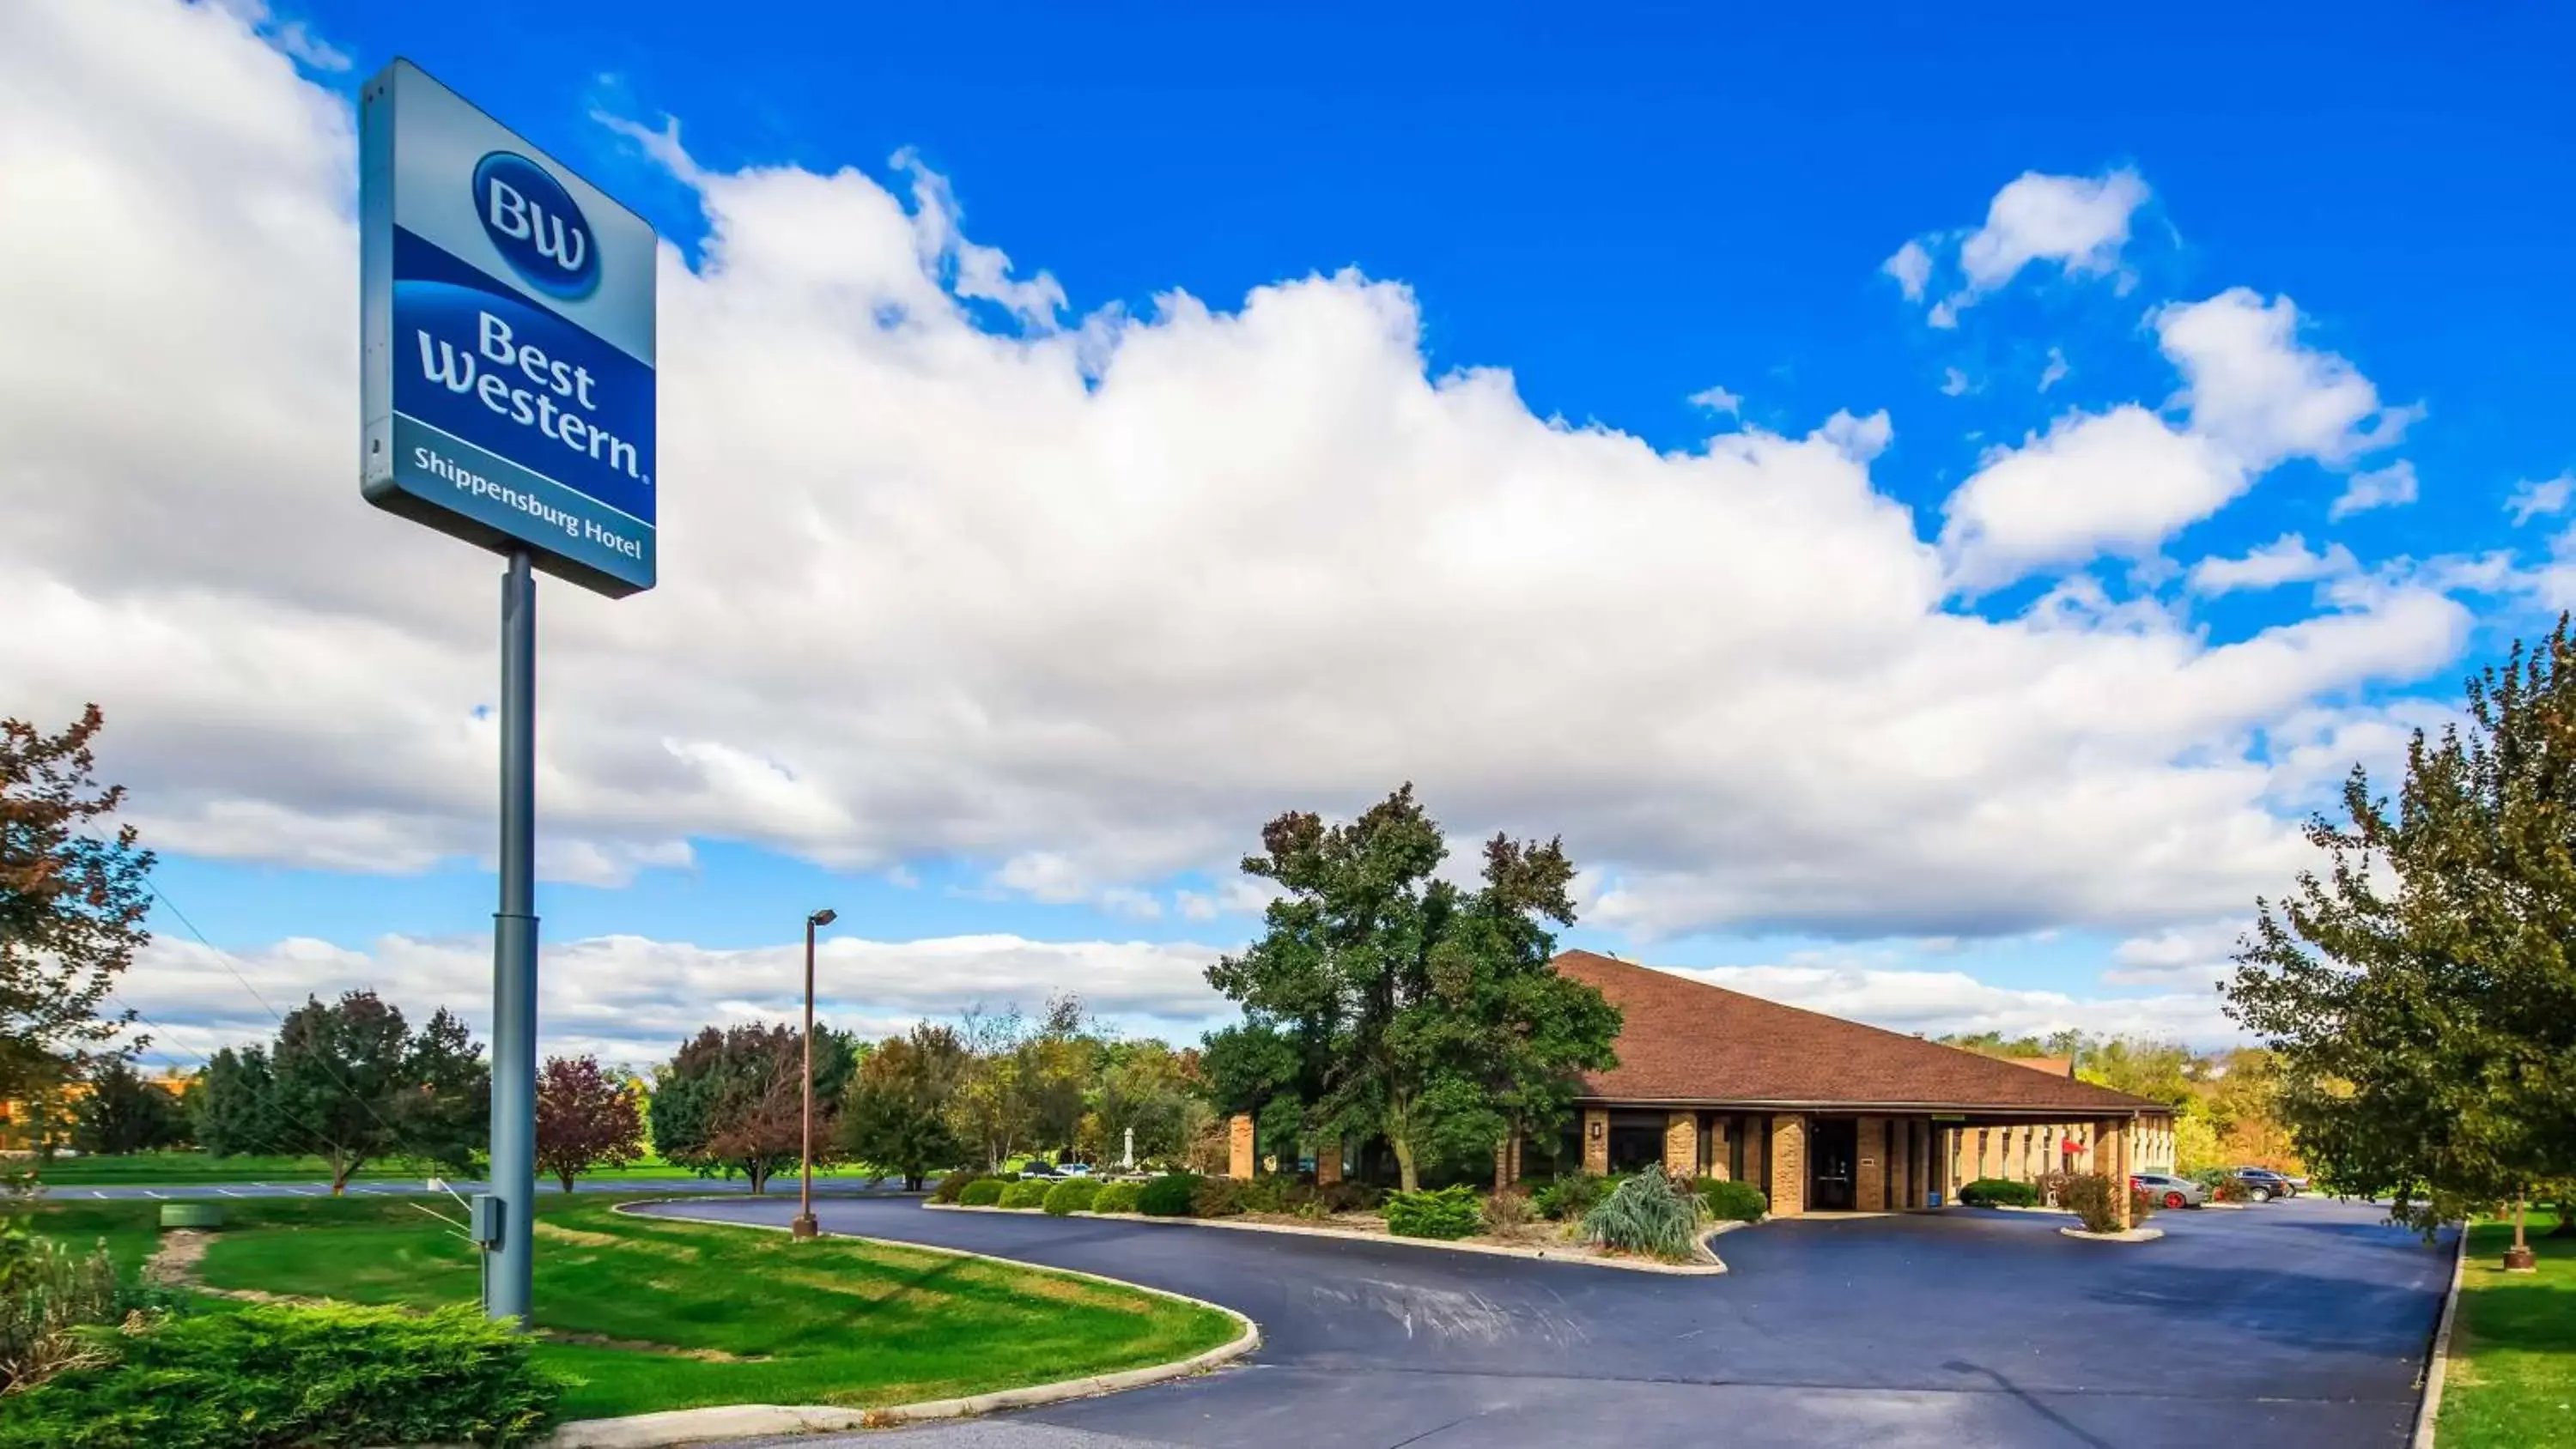 Property Building in Best Western Shippensburg